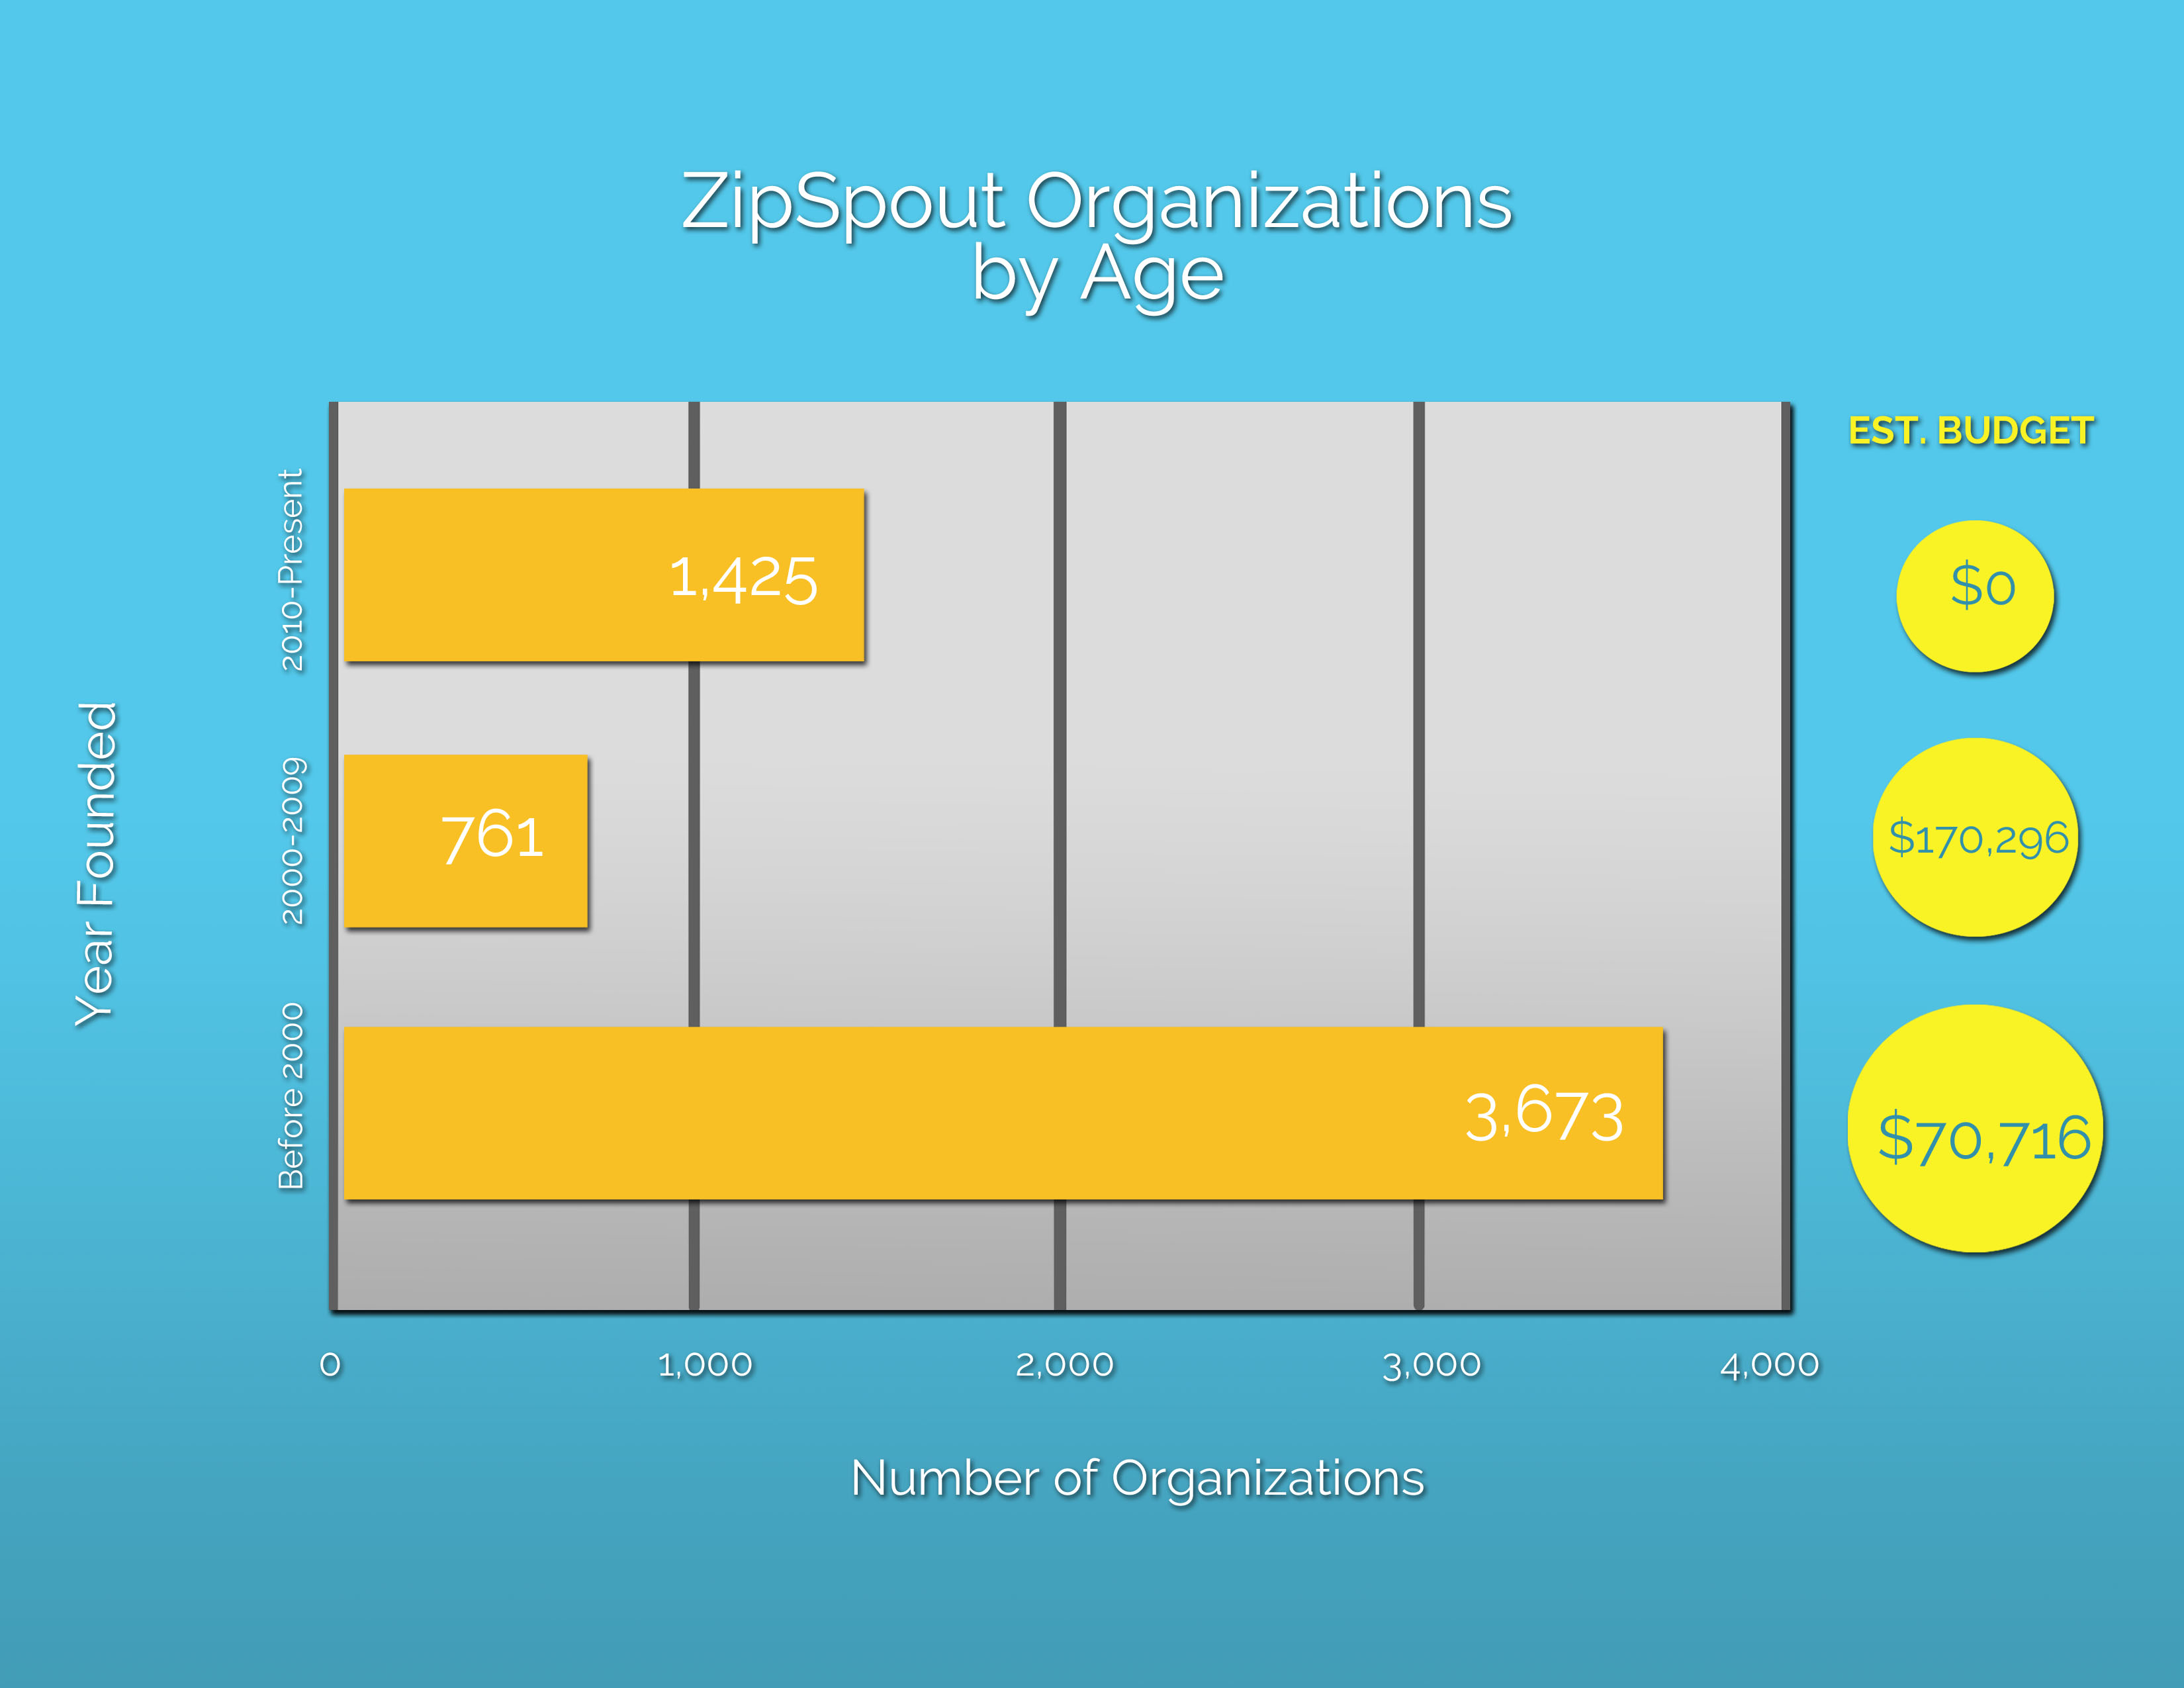 age of ZipSprout organizations